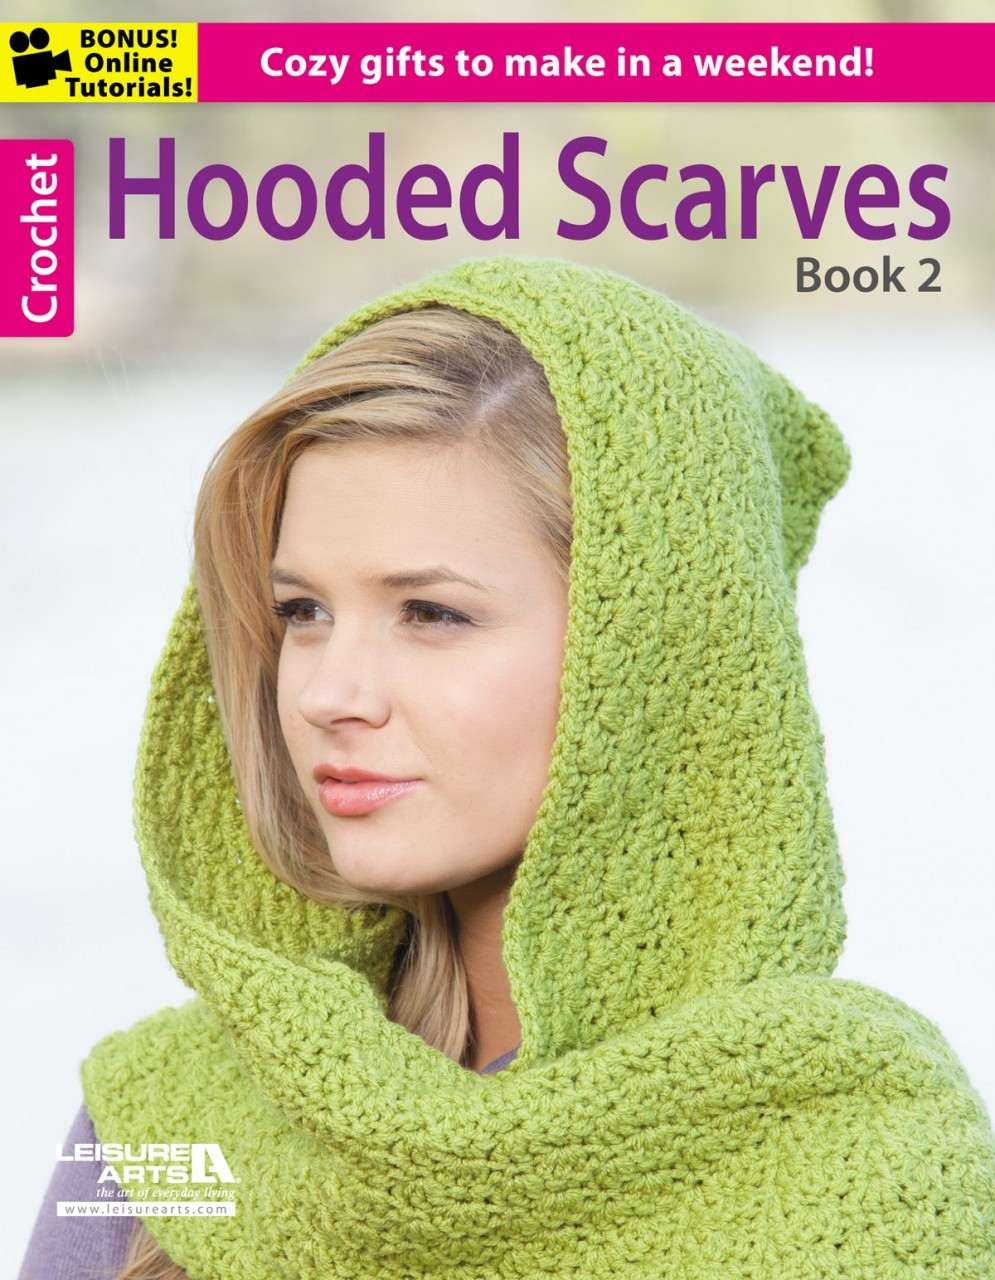 Knitted Hood Scarf Pattern Hooded Scarves Book 2